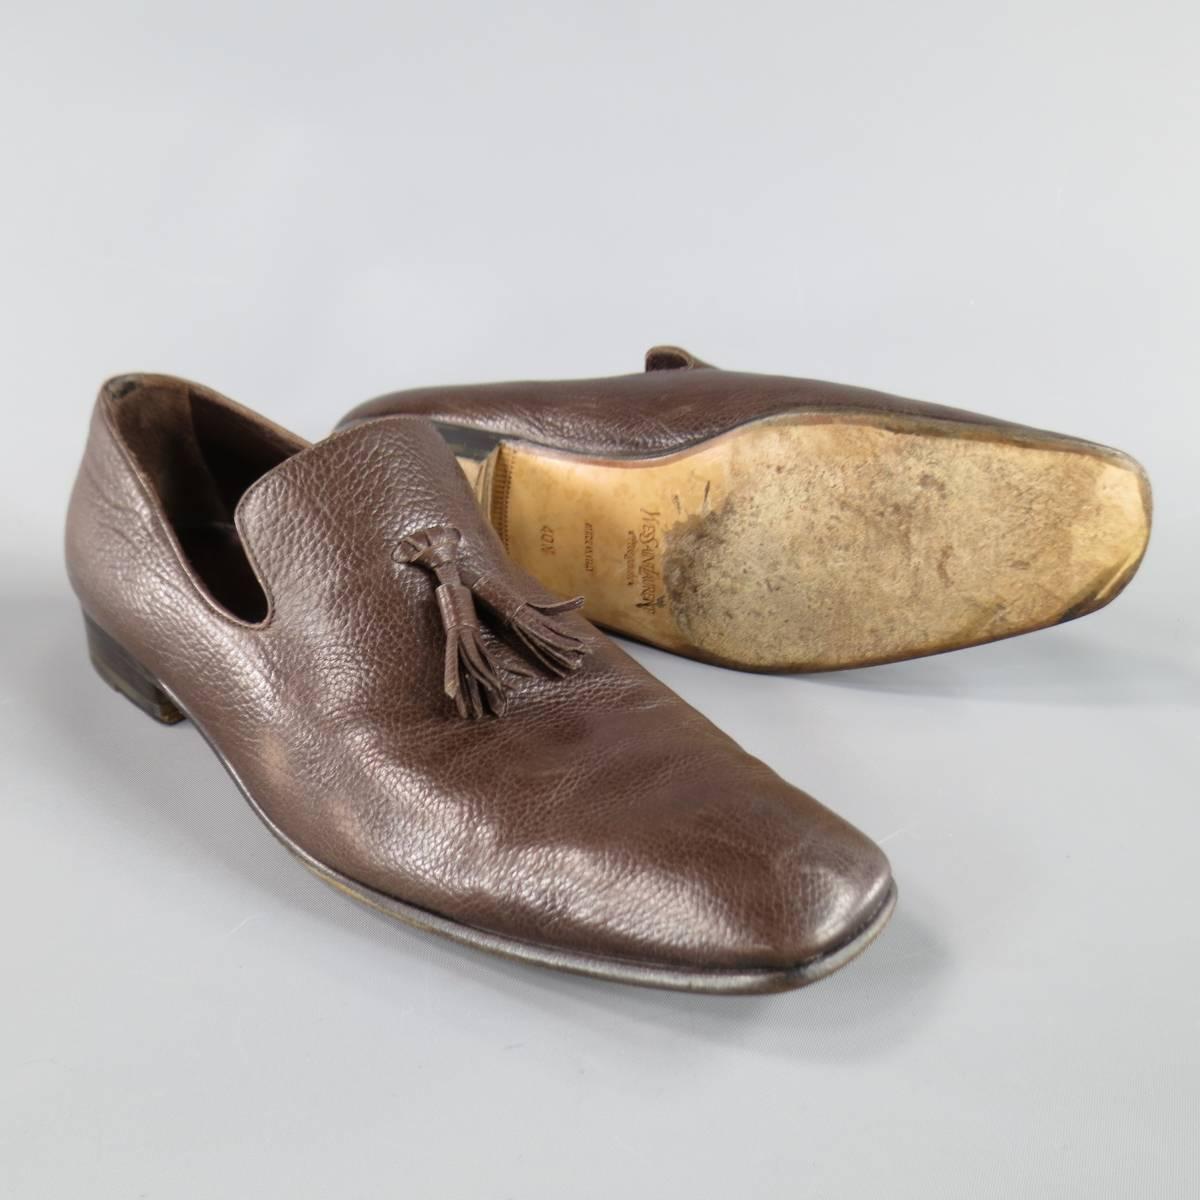 YVES SAINT LAURENT Loafers consists of leather material in a brown color tone. Designed in a square toe front, grain textured pattern with double tassels. Detailed with brown leather sole. Made in Italy.
 
Good Pre-Owned Condition 
Marked Size: 40